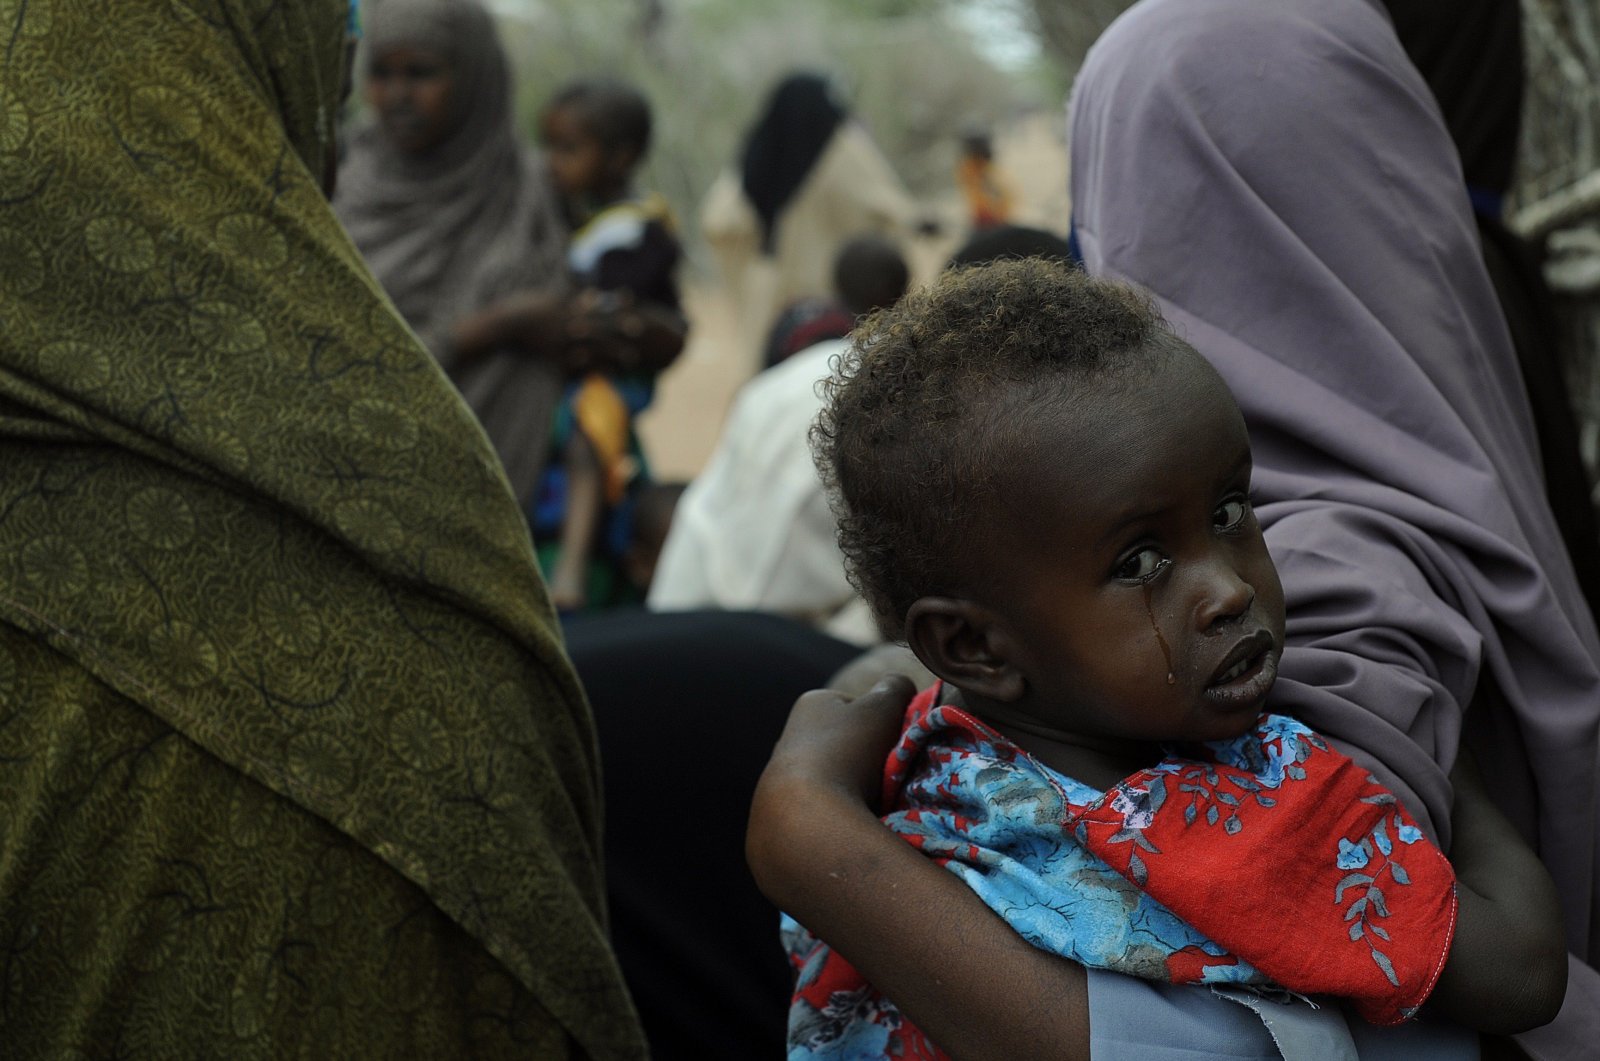 A young Somali refugee waits with her mother to be vaccinated at a pediatric vaccination center at the Hagadere refugee site within the Dadaab refugee complex in northeast Kenya, Aug. 1, 2011. (AFP Photo)